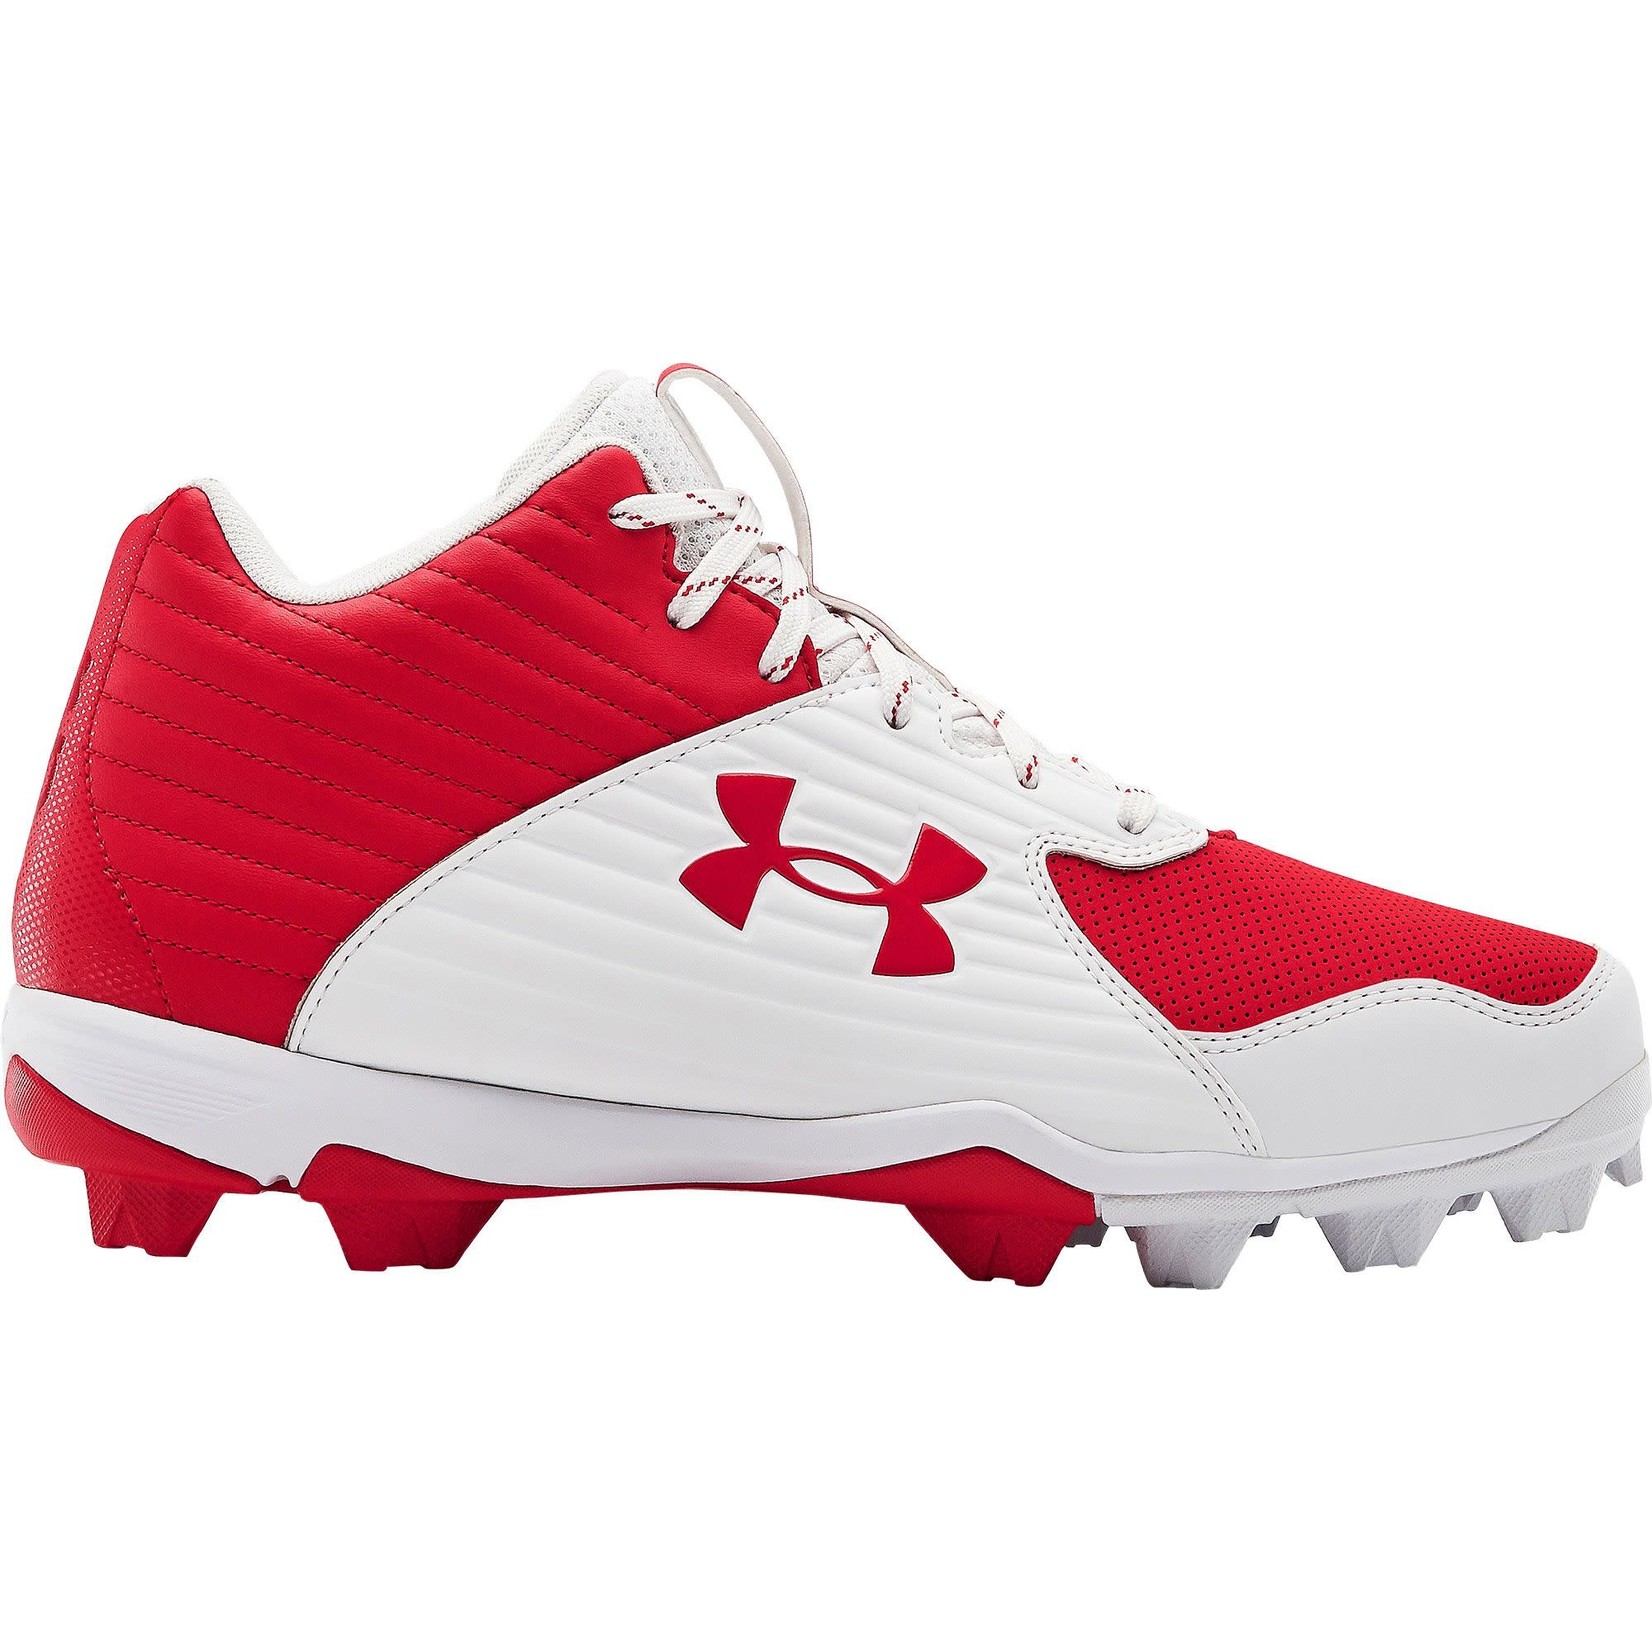 Under Armour Youth Under Armour Leadoff Mid RM Cleats